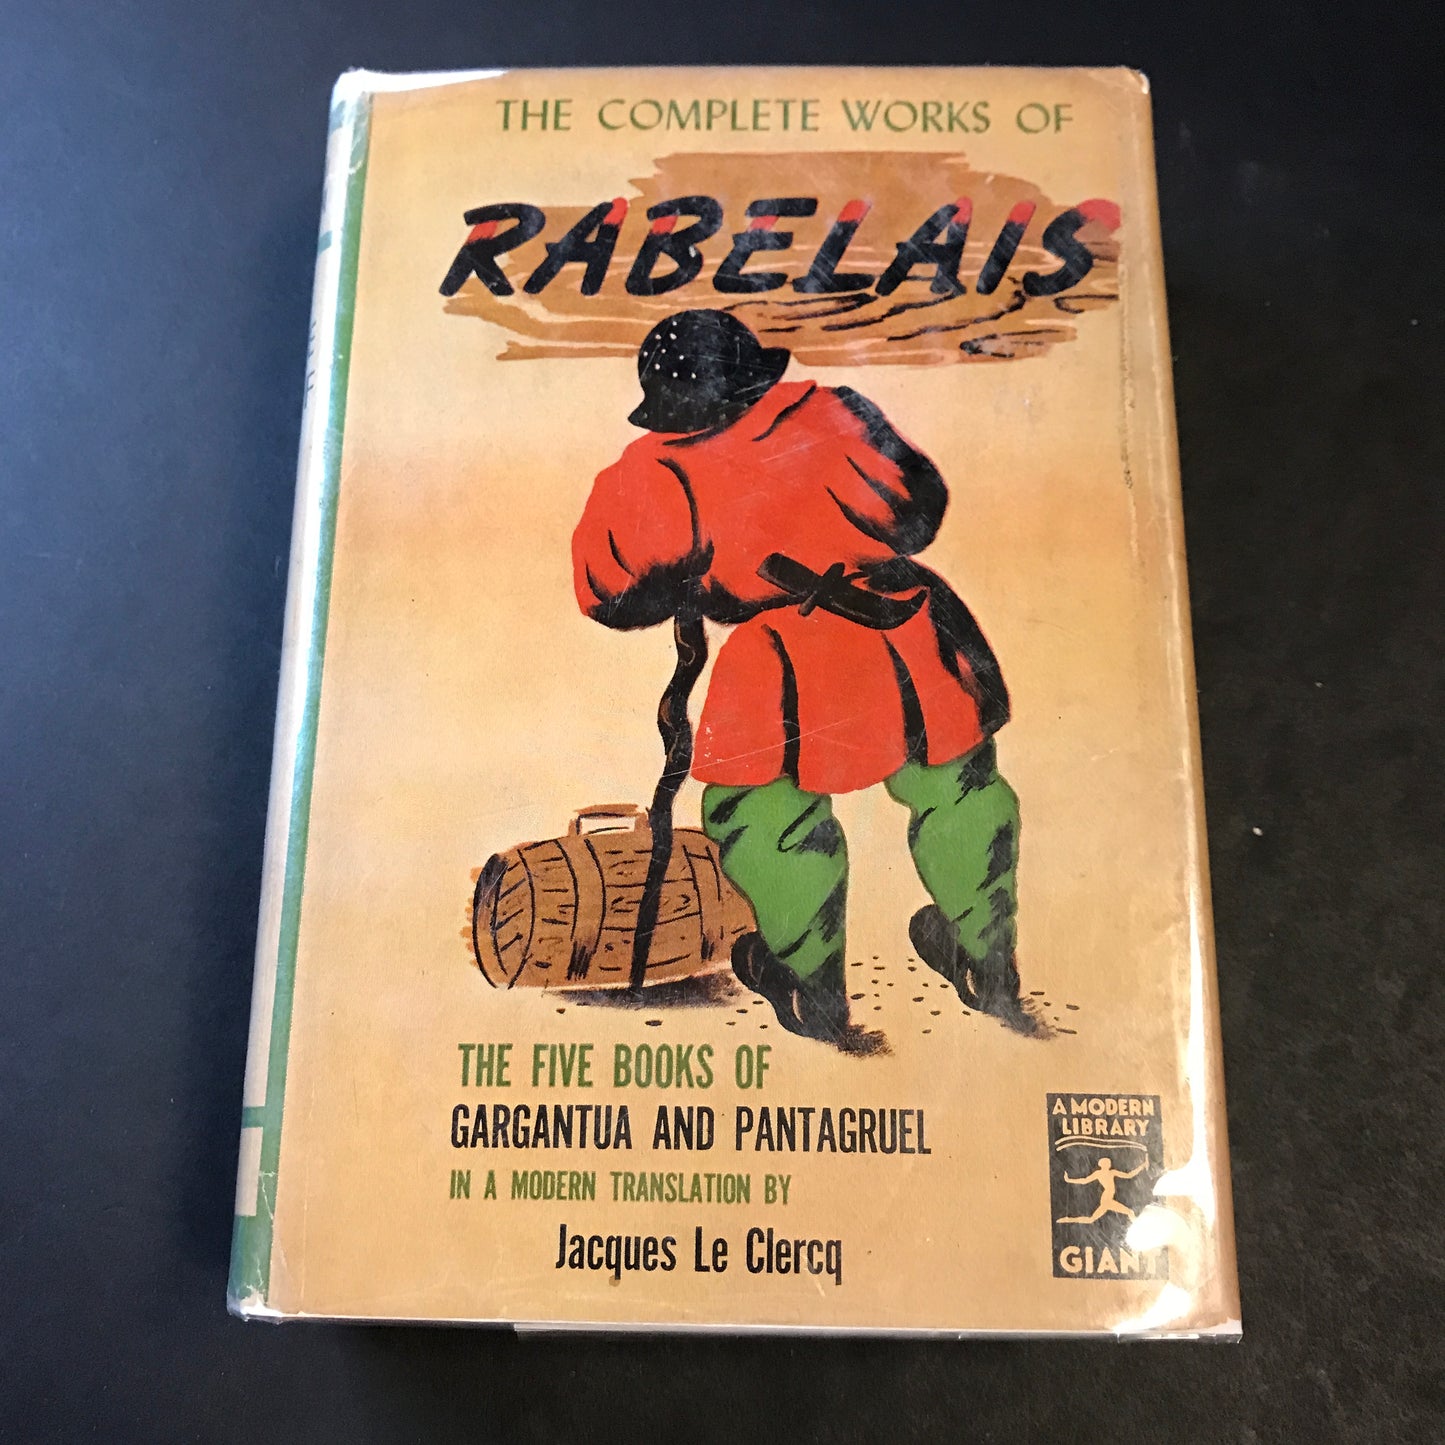 The Complete Works of Rabelais - Jacques Le Clercq - 1st Thus - 1944